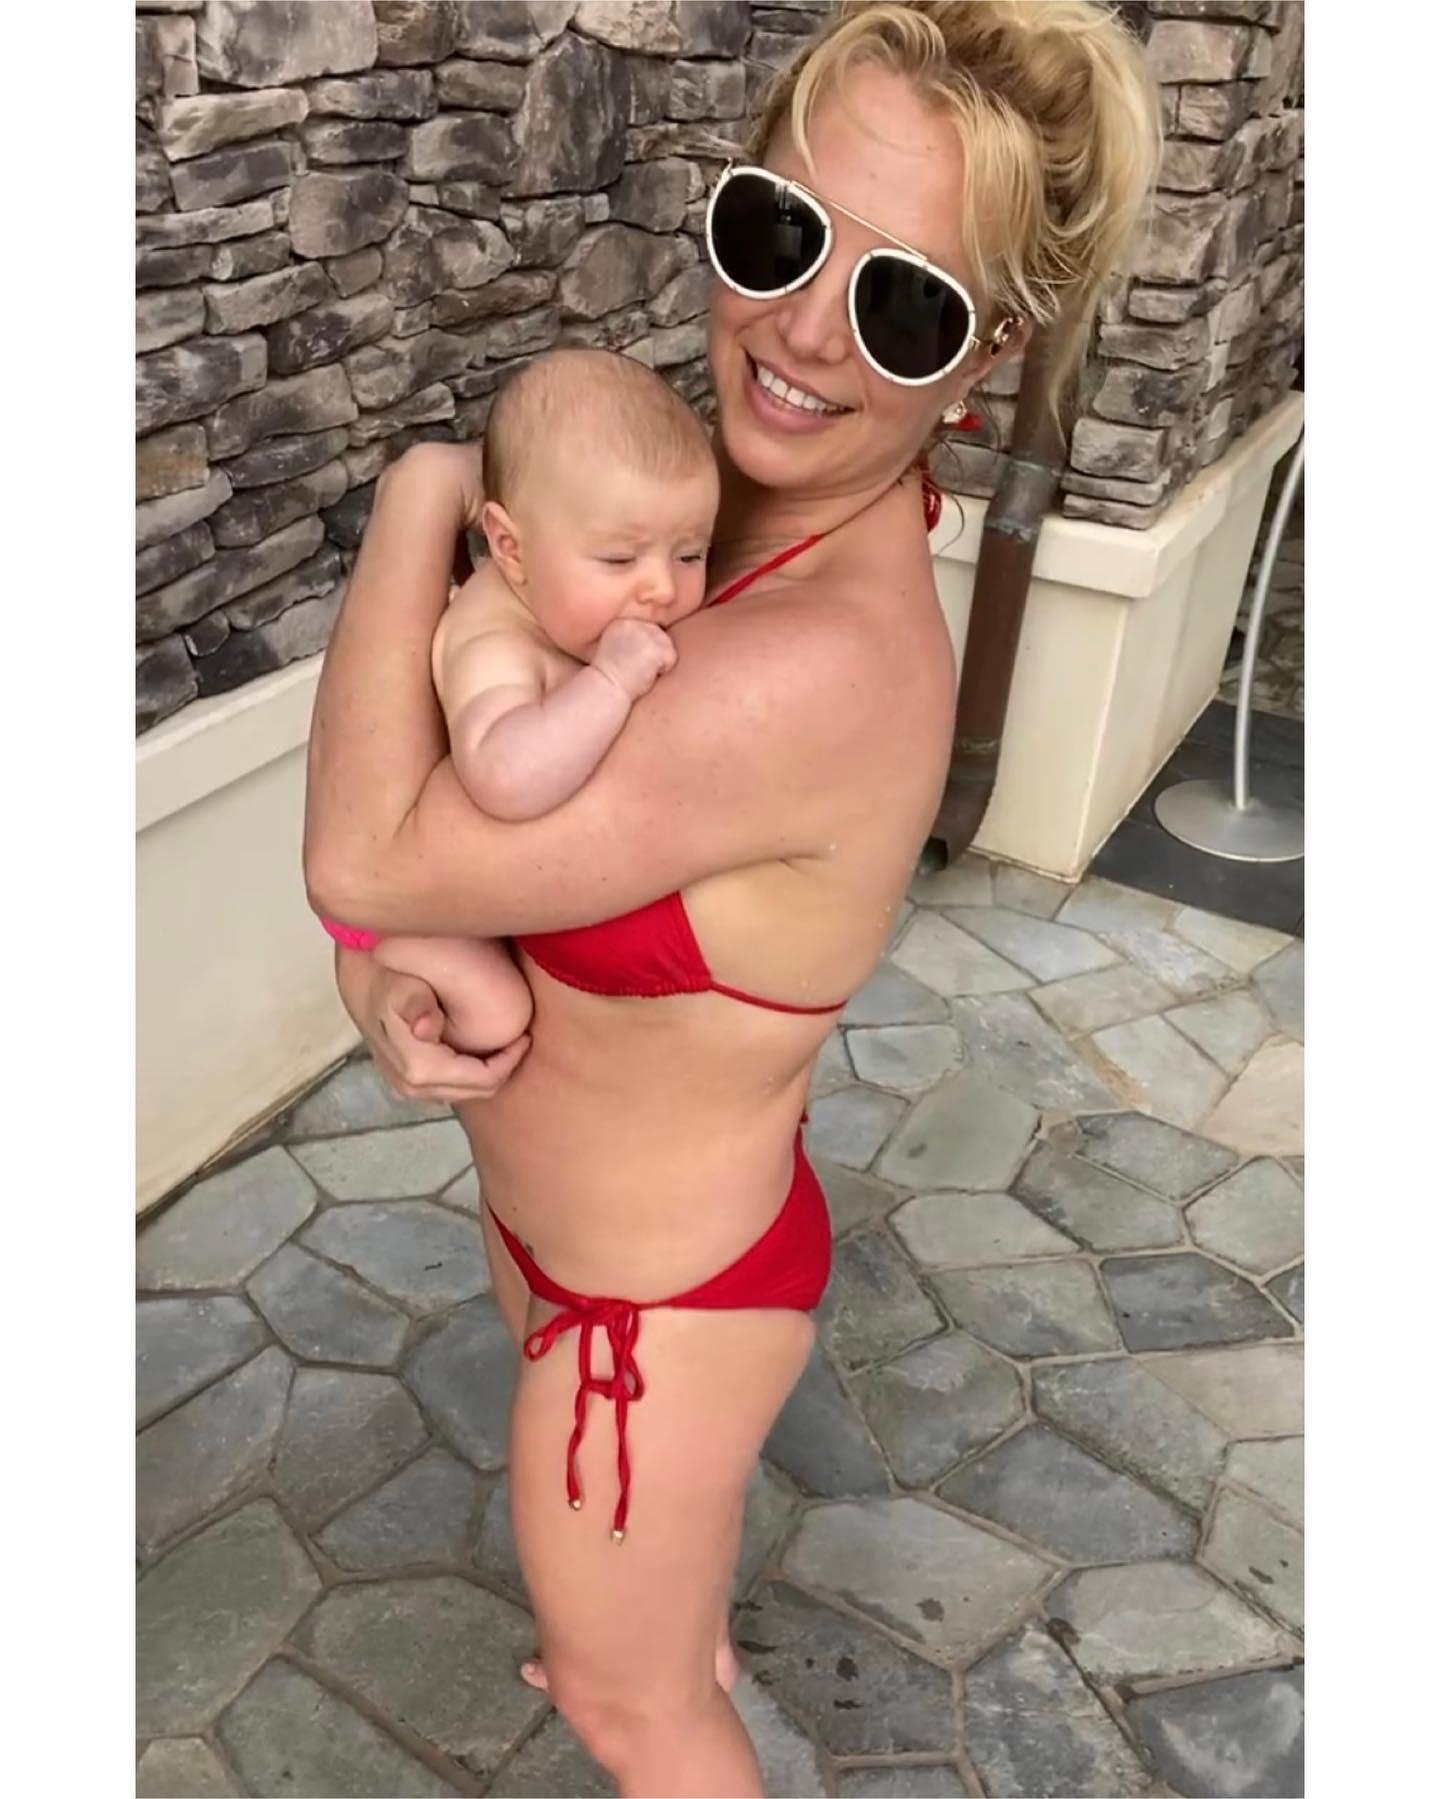 Britney Spears said she ate play-dog with a baby she found on vacation